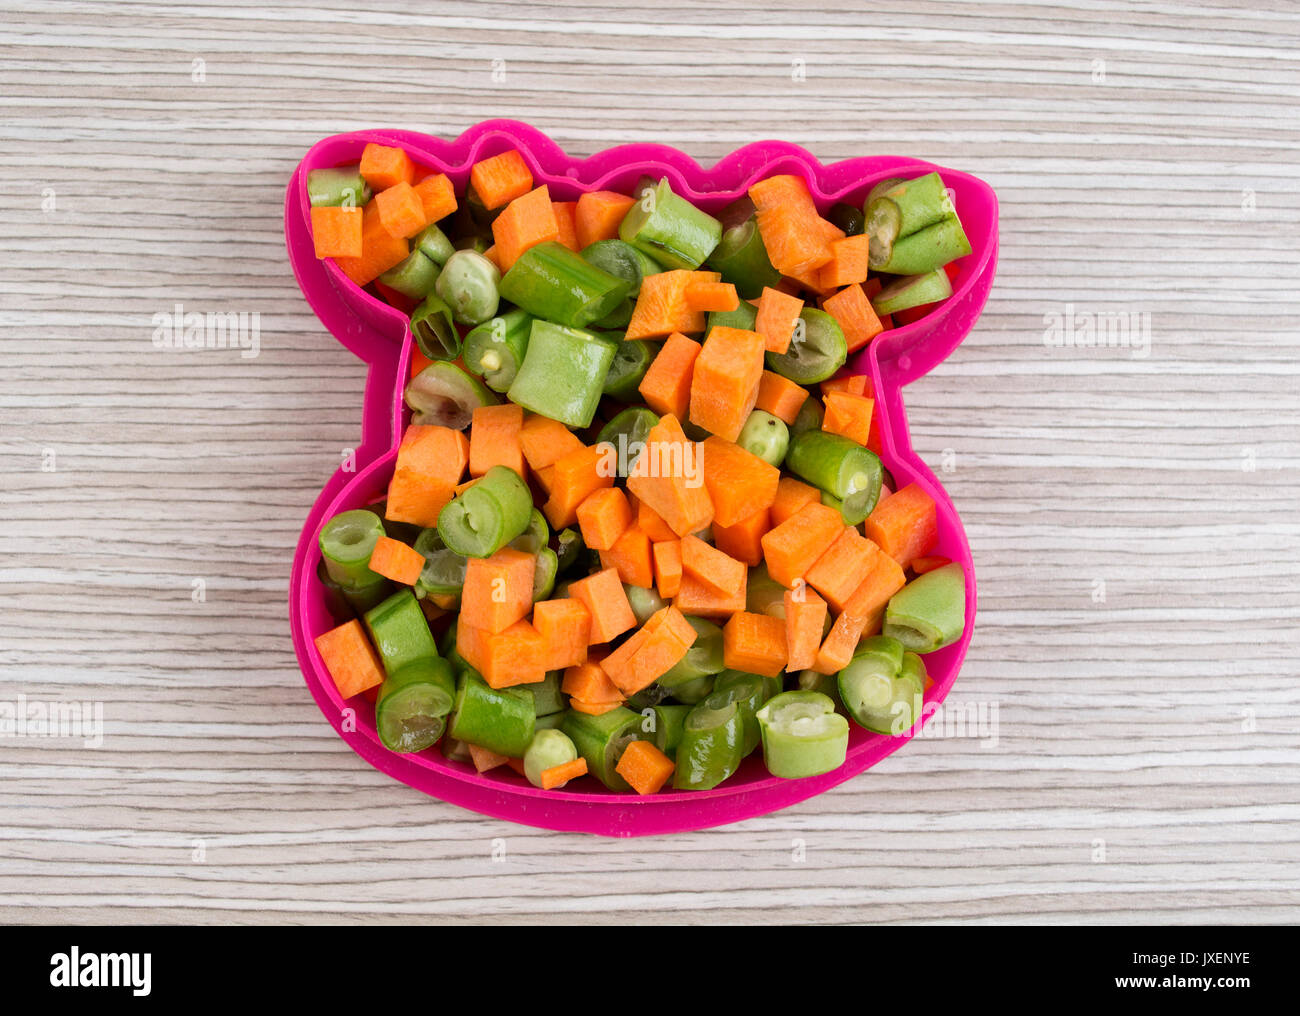 Cow shape by various vegetables on the table. Stock Photo